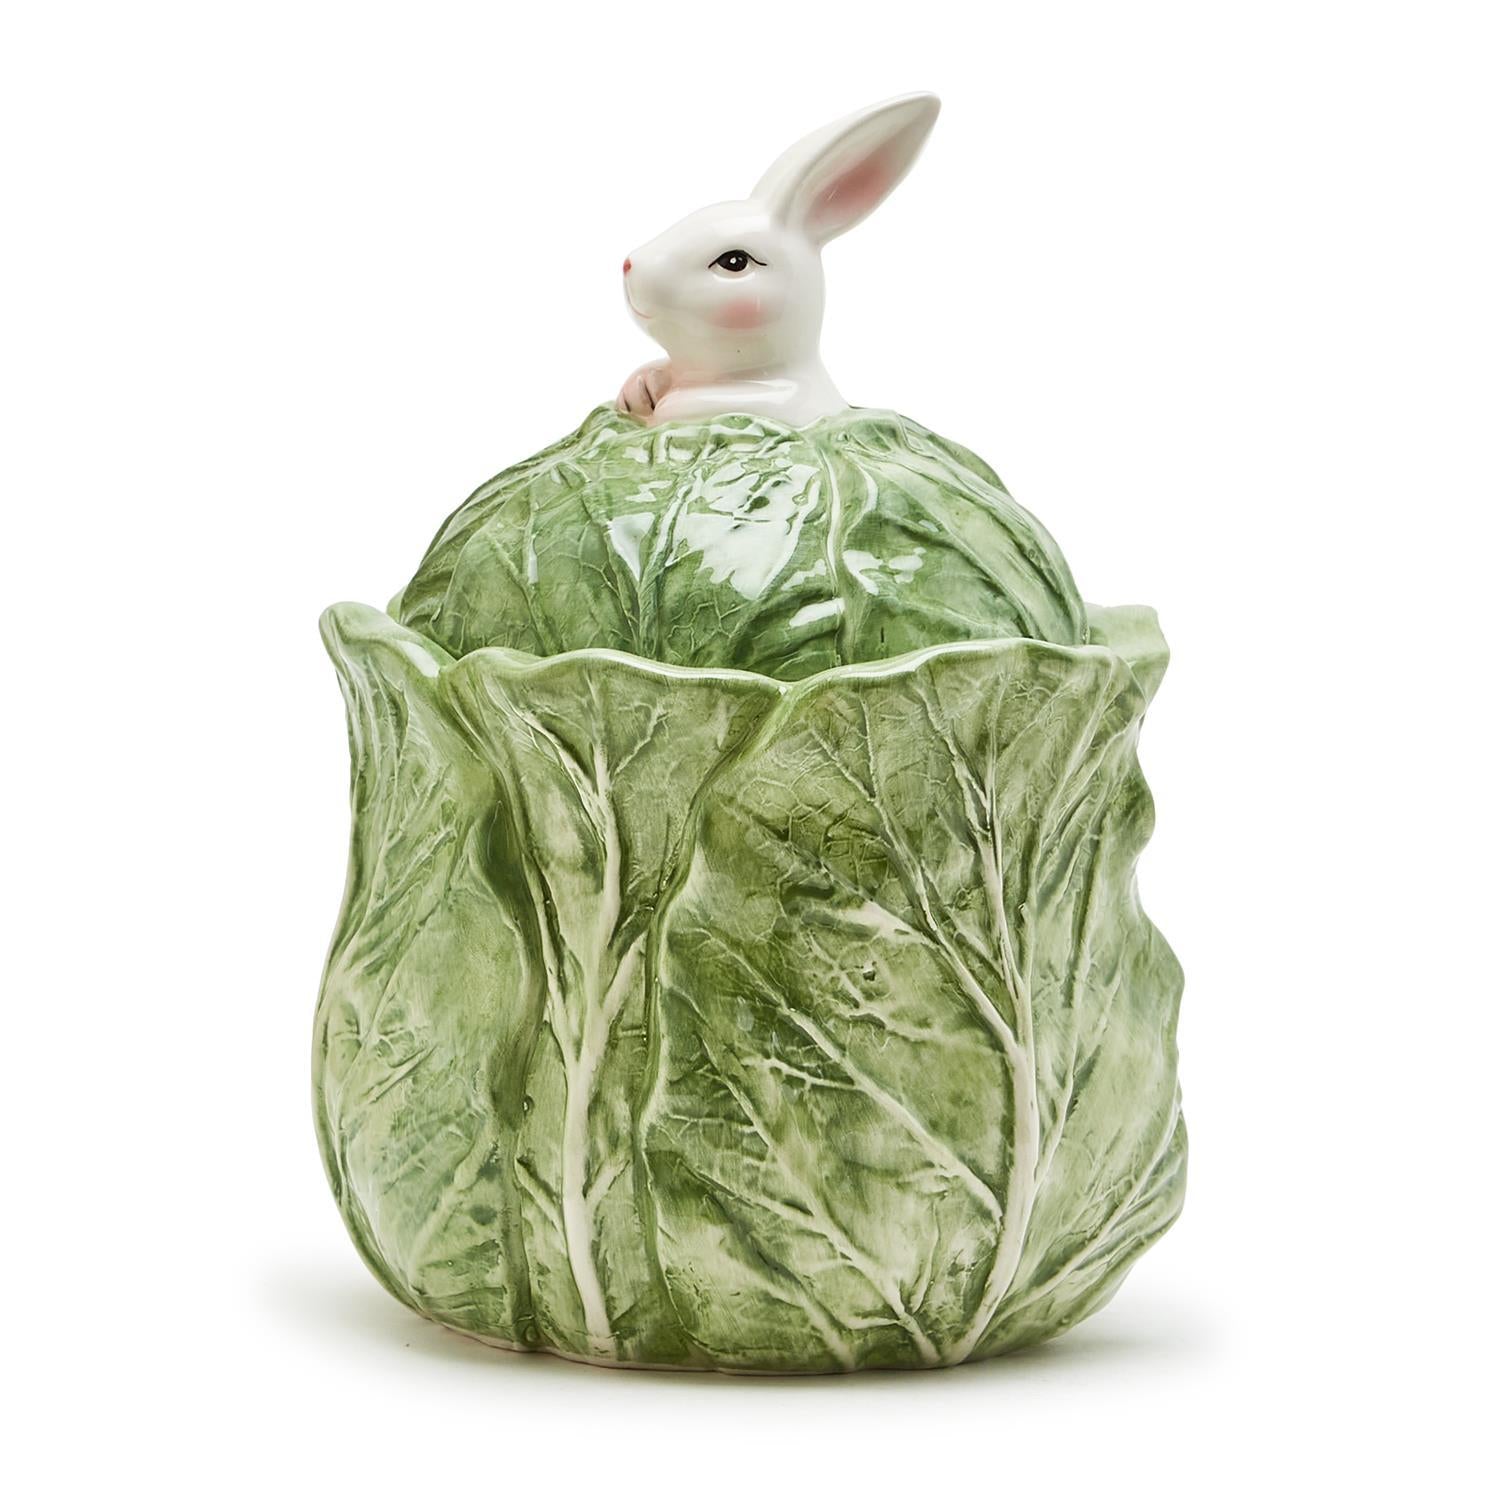 Cabbage Leaf Jar with Bunny - The Preppy Bunny